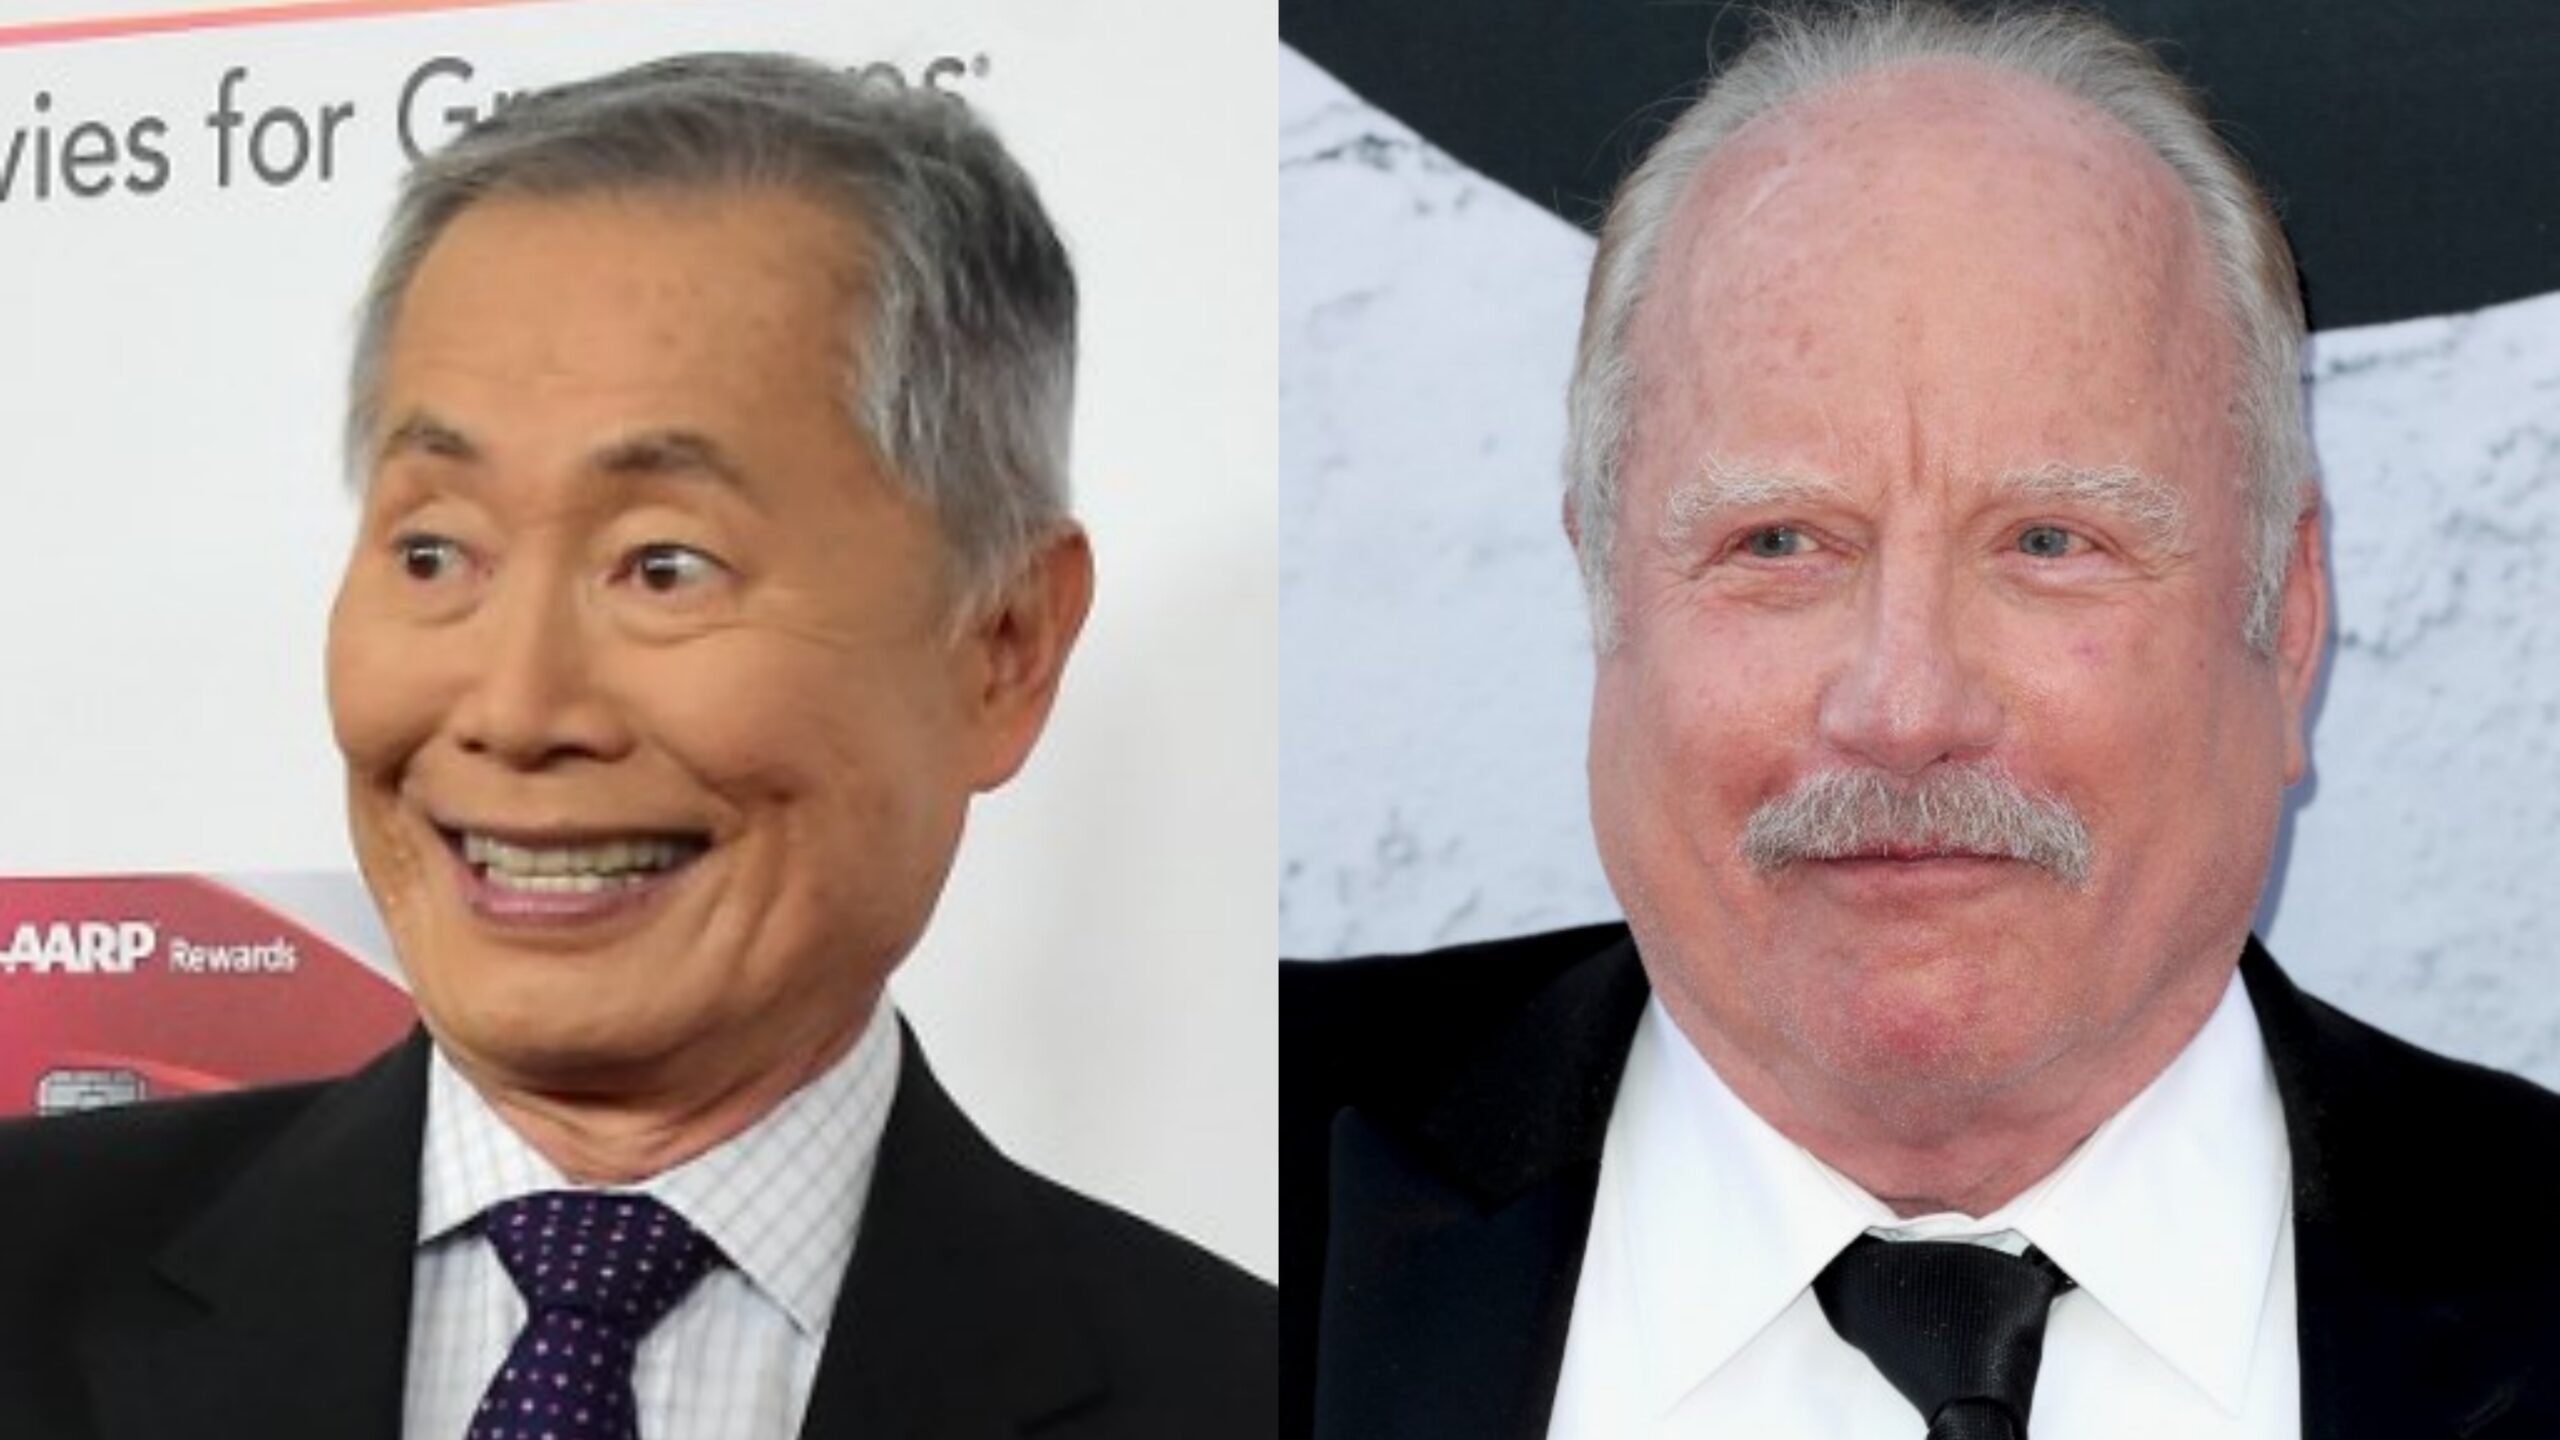 George Takei, Richard Dreyfuss face sexual misconduct claims